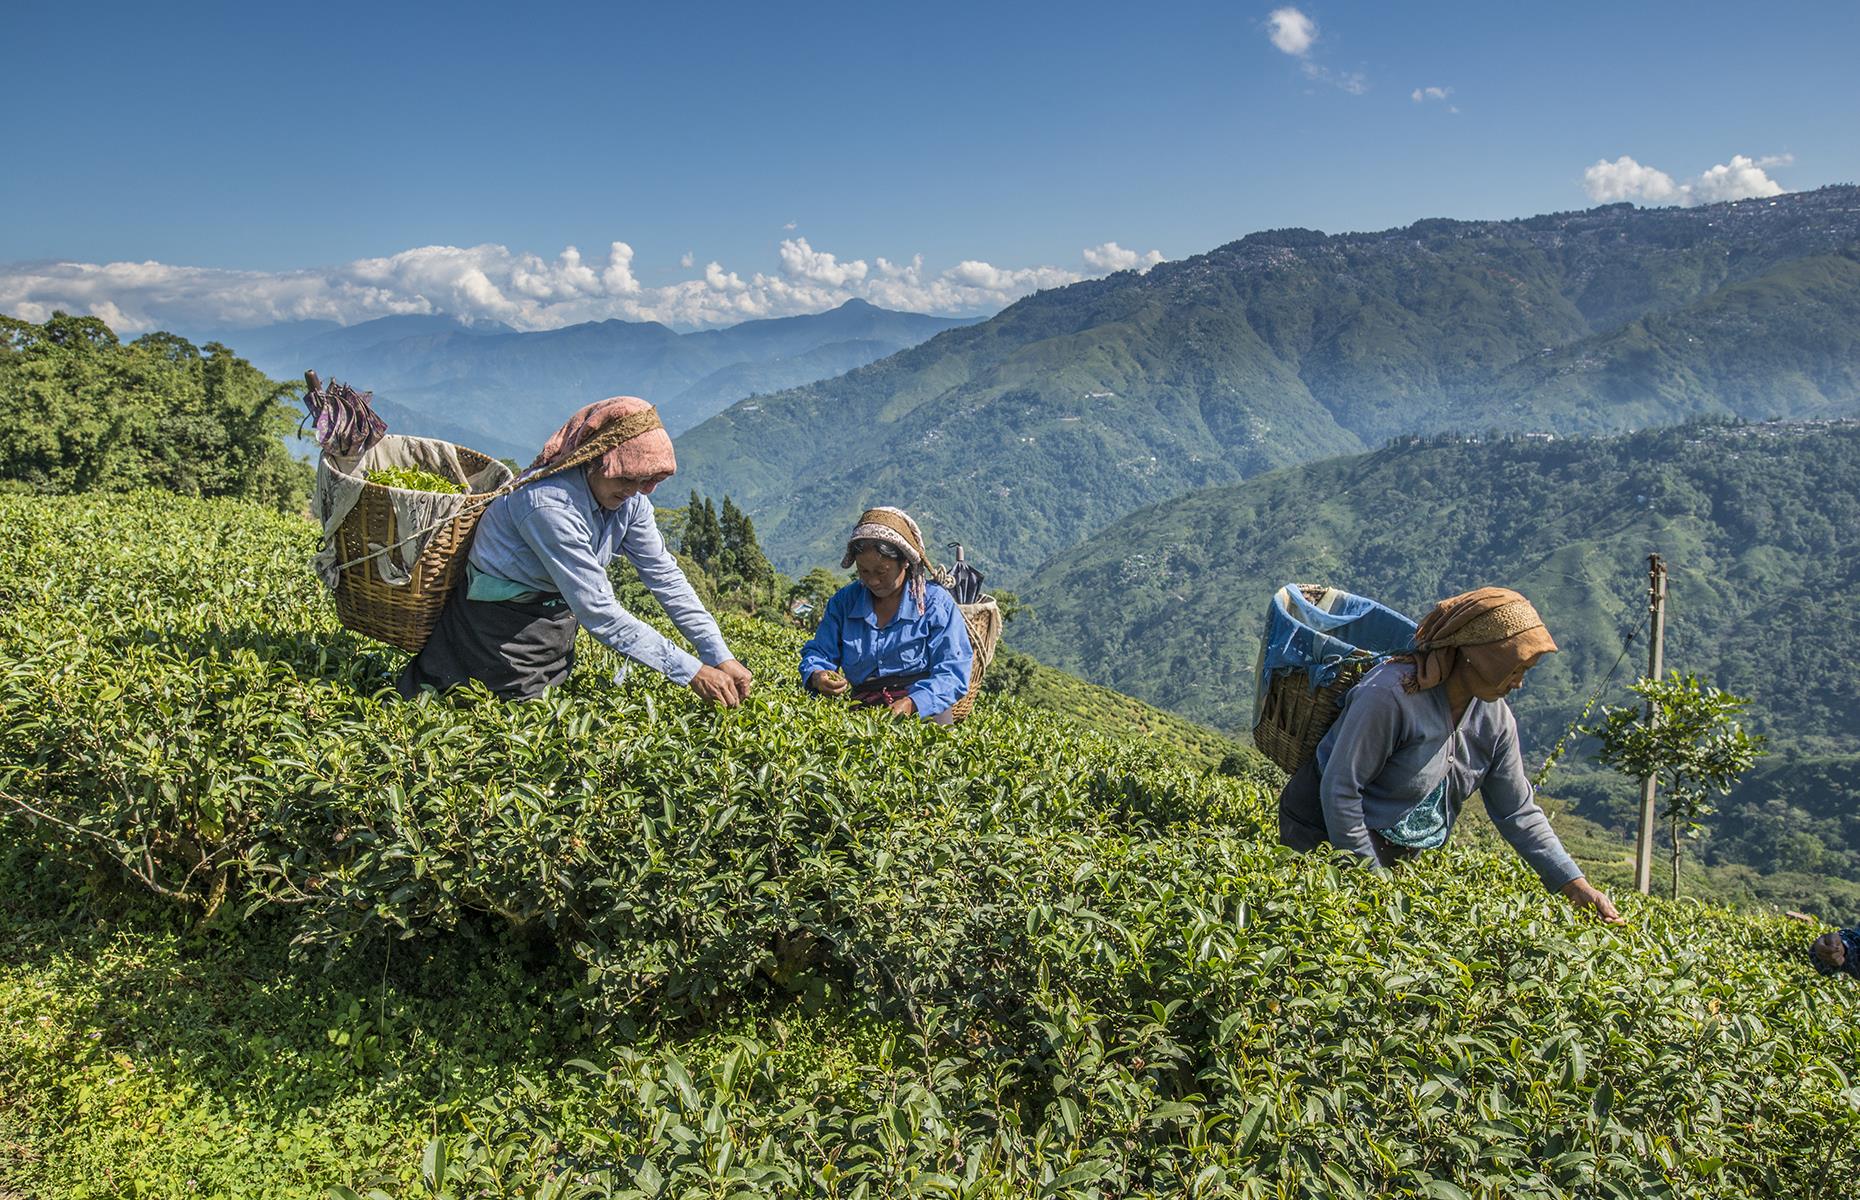 <p>Tea, toy trains, temples, and trekking galore – this Himalayan hill town has plenty to recommend it. There are manicured tea estates, and yet more wild and stunning scenery on offer for those who hike into its forests and along its Himalayan trails.</p>  <p>The best time to visit this peaceful paradise is between April and June.</p>